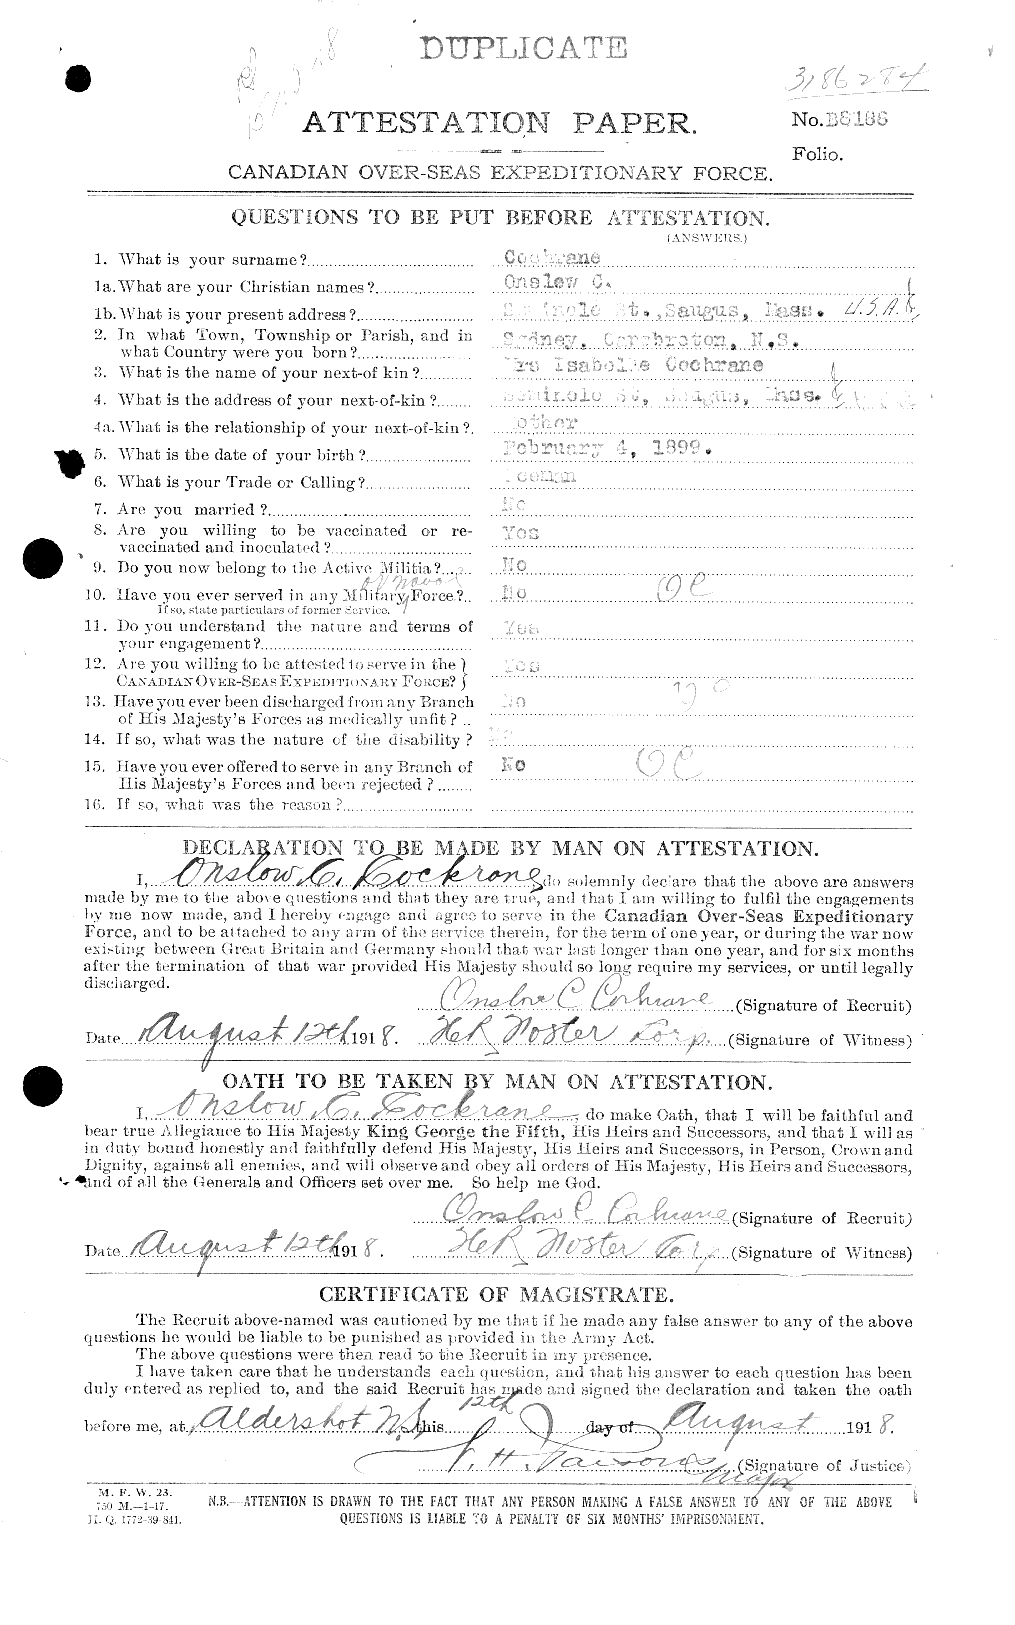 Personnel Records of the First World War - CEF 026438a